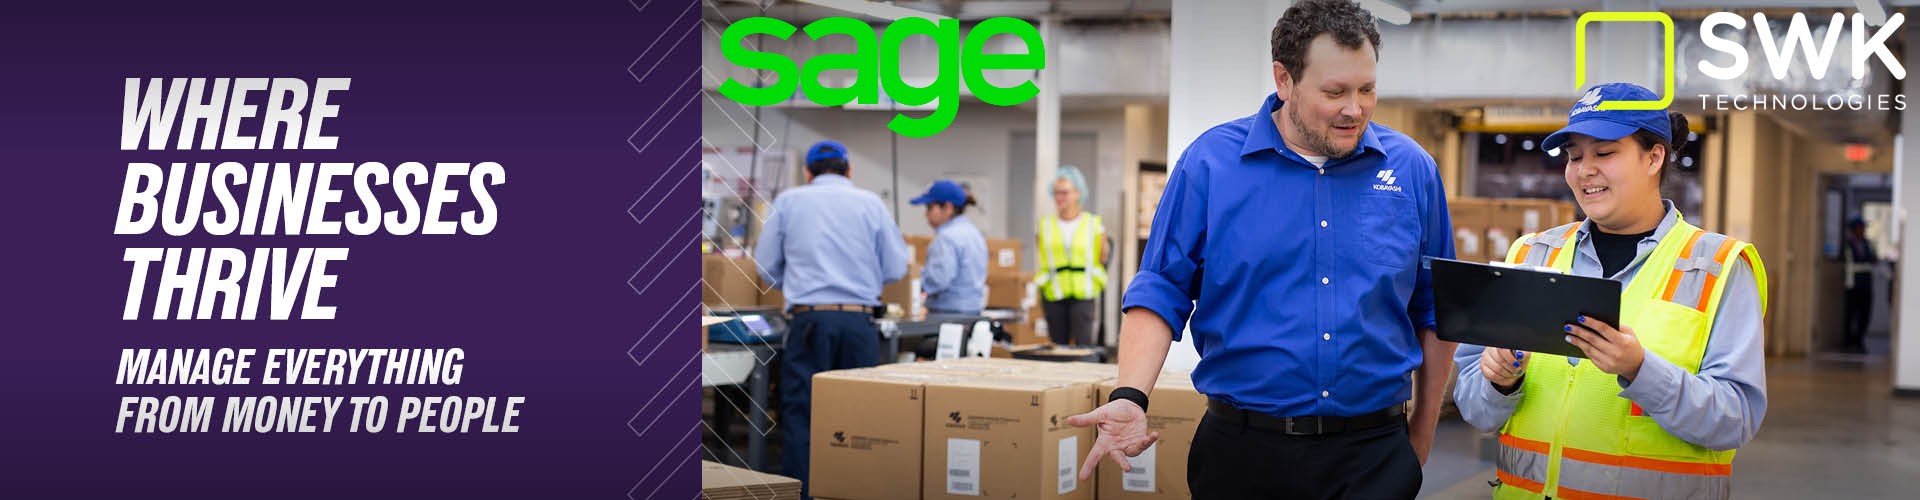 register for sage sessions X3 here